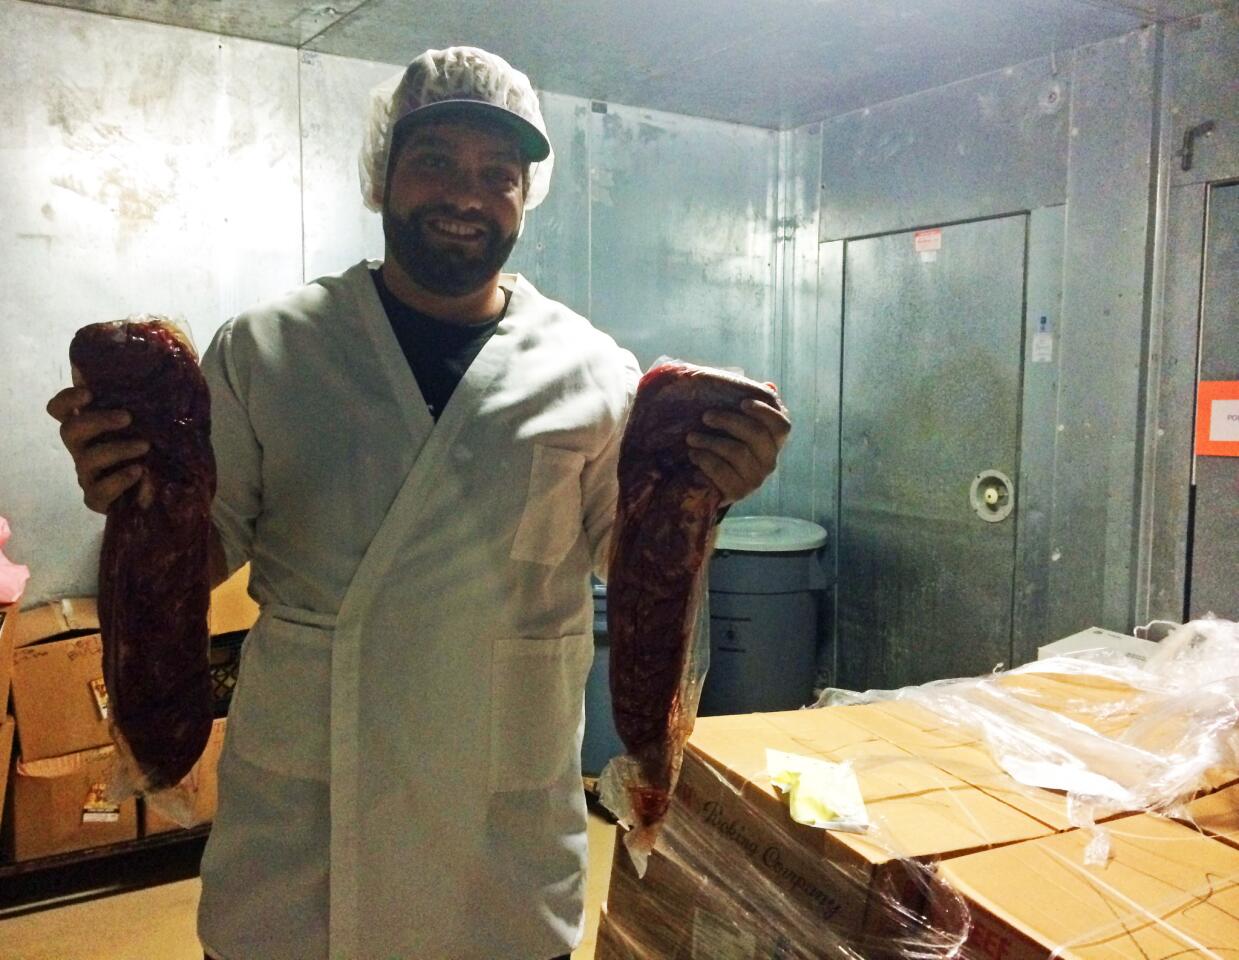 Daniel Fogelson holds two beef tenderloins on their way to becoming jerky at the Settlers Jerky Inc. facility in Walnut, Calif.